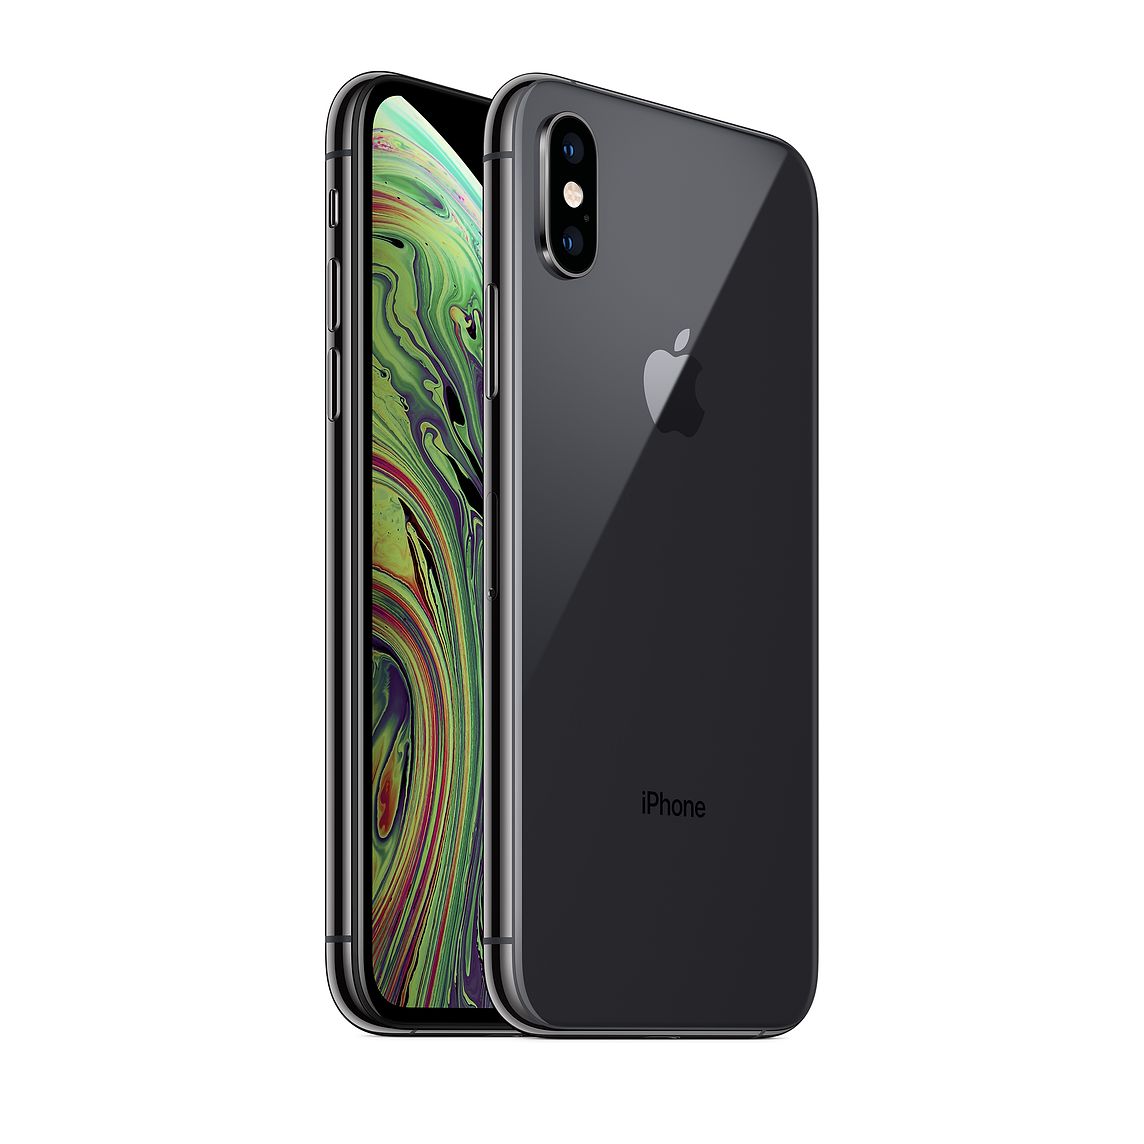 Iphone XS 64gb Space Gray (UK Used)